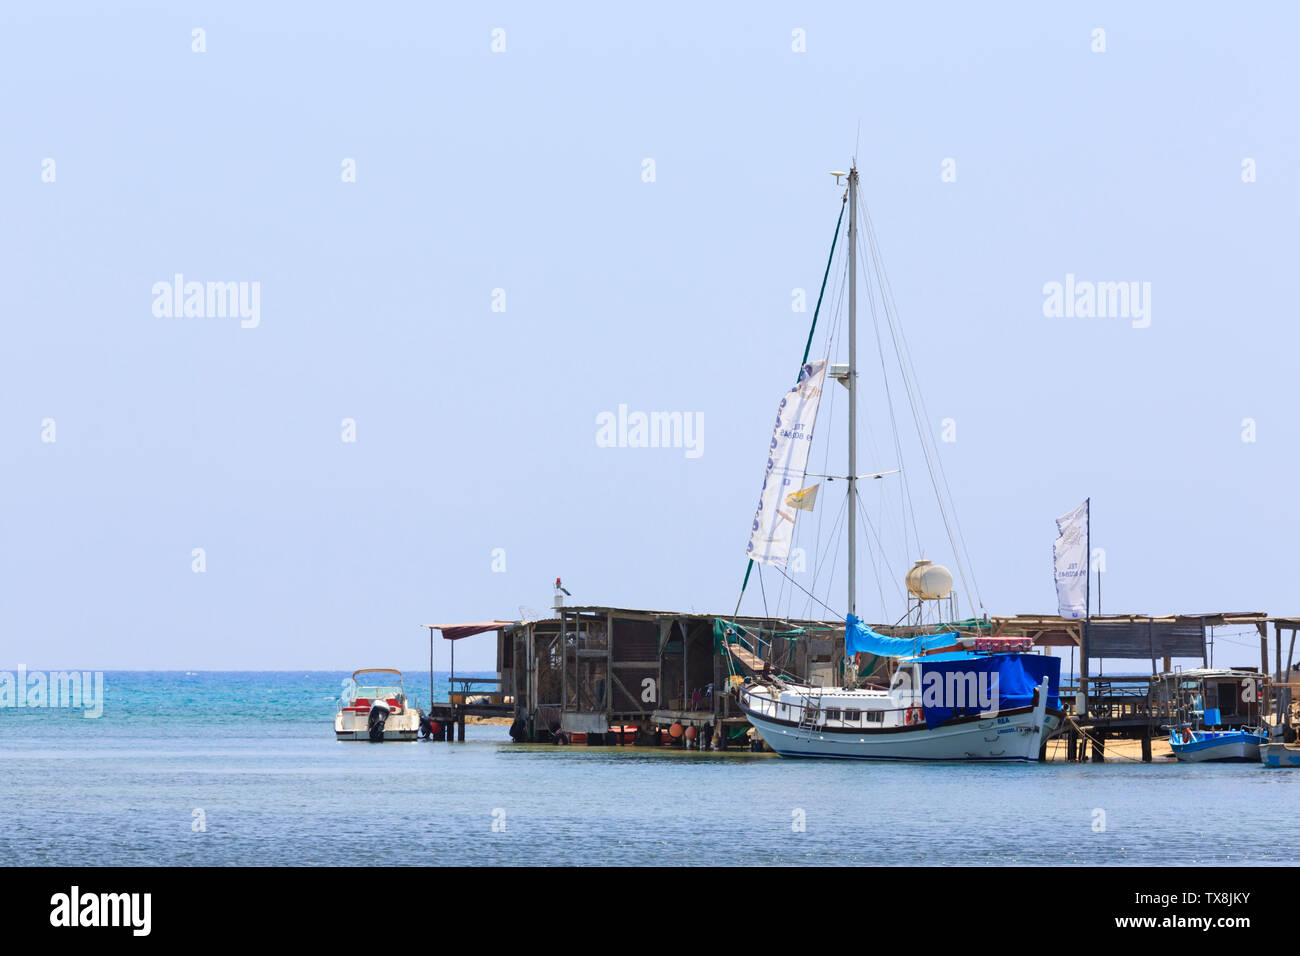 Boats moored at the inlet to Potamos Creek, Liopetri, Cyprus. Stock Photo